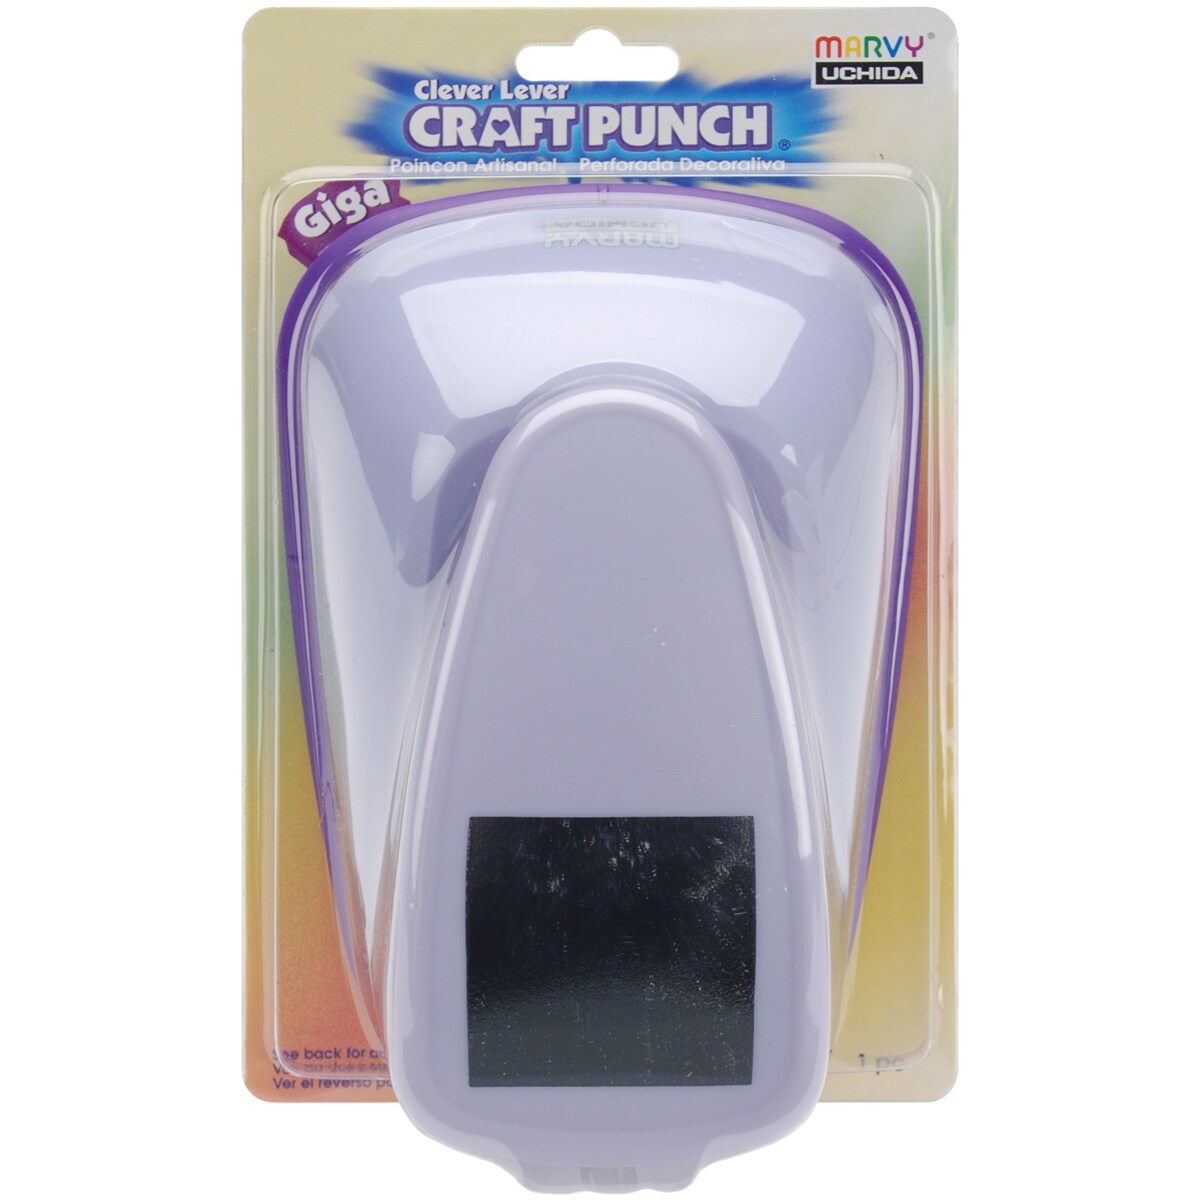 Clever Lever Giga Craft Punch-Square